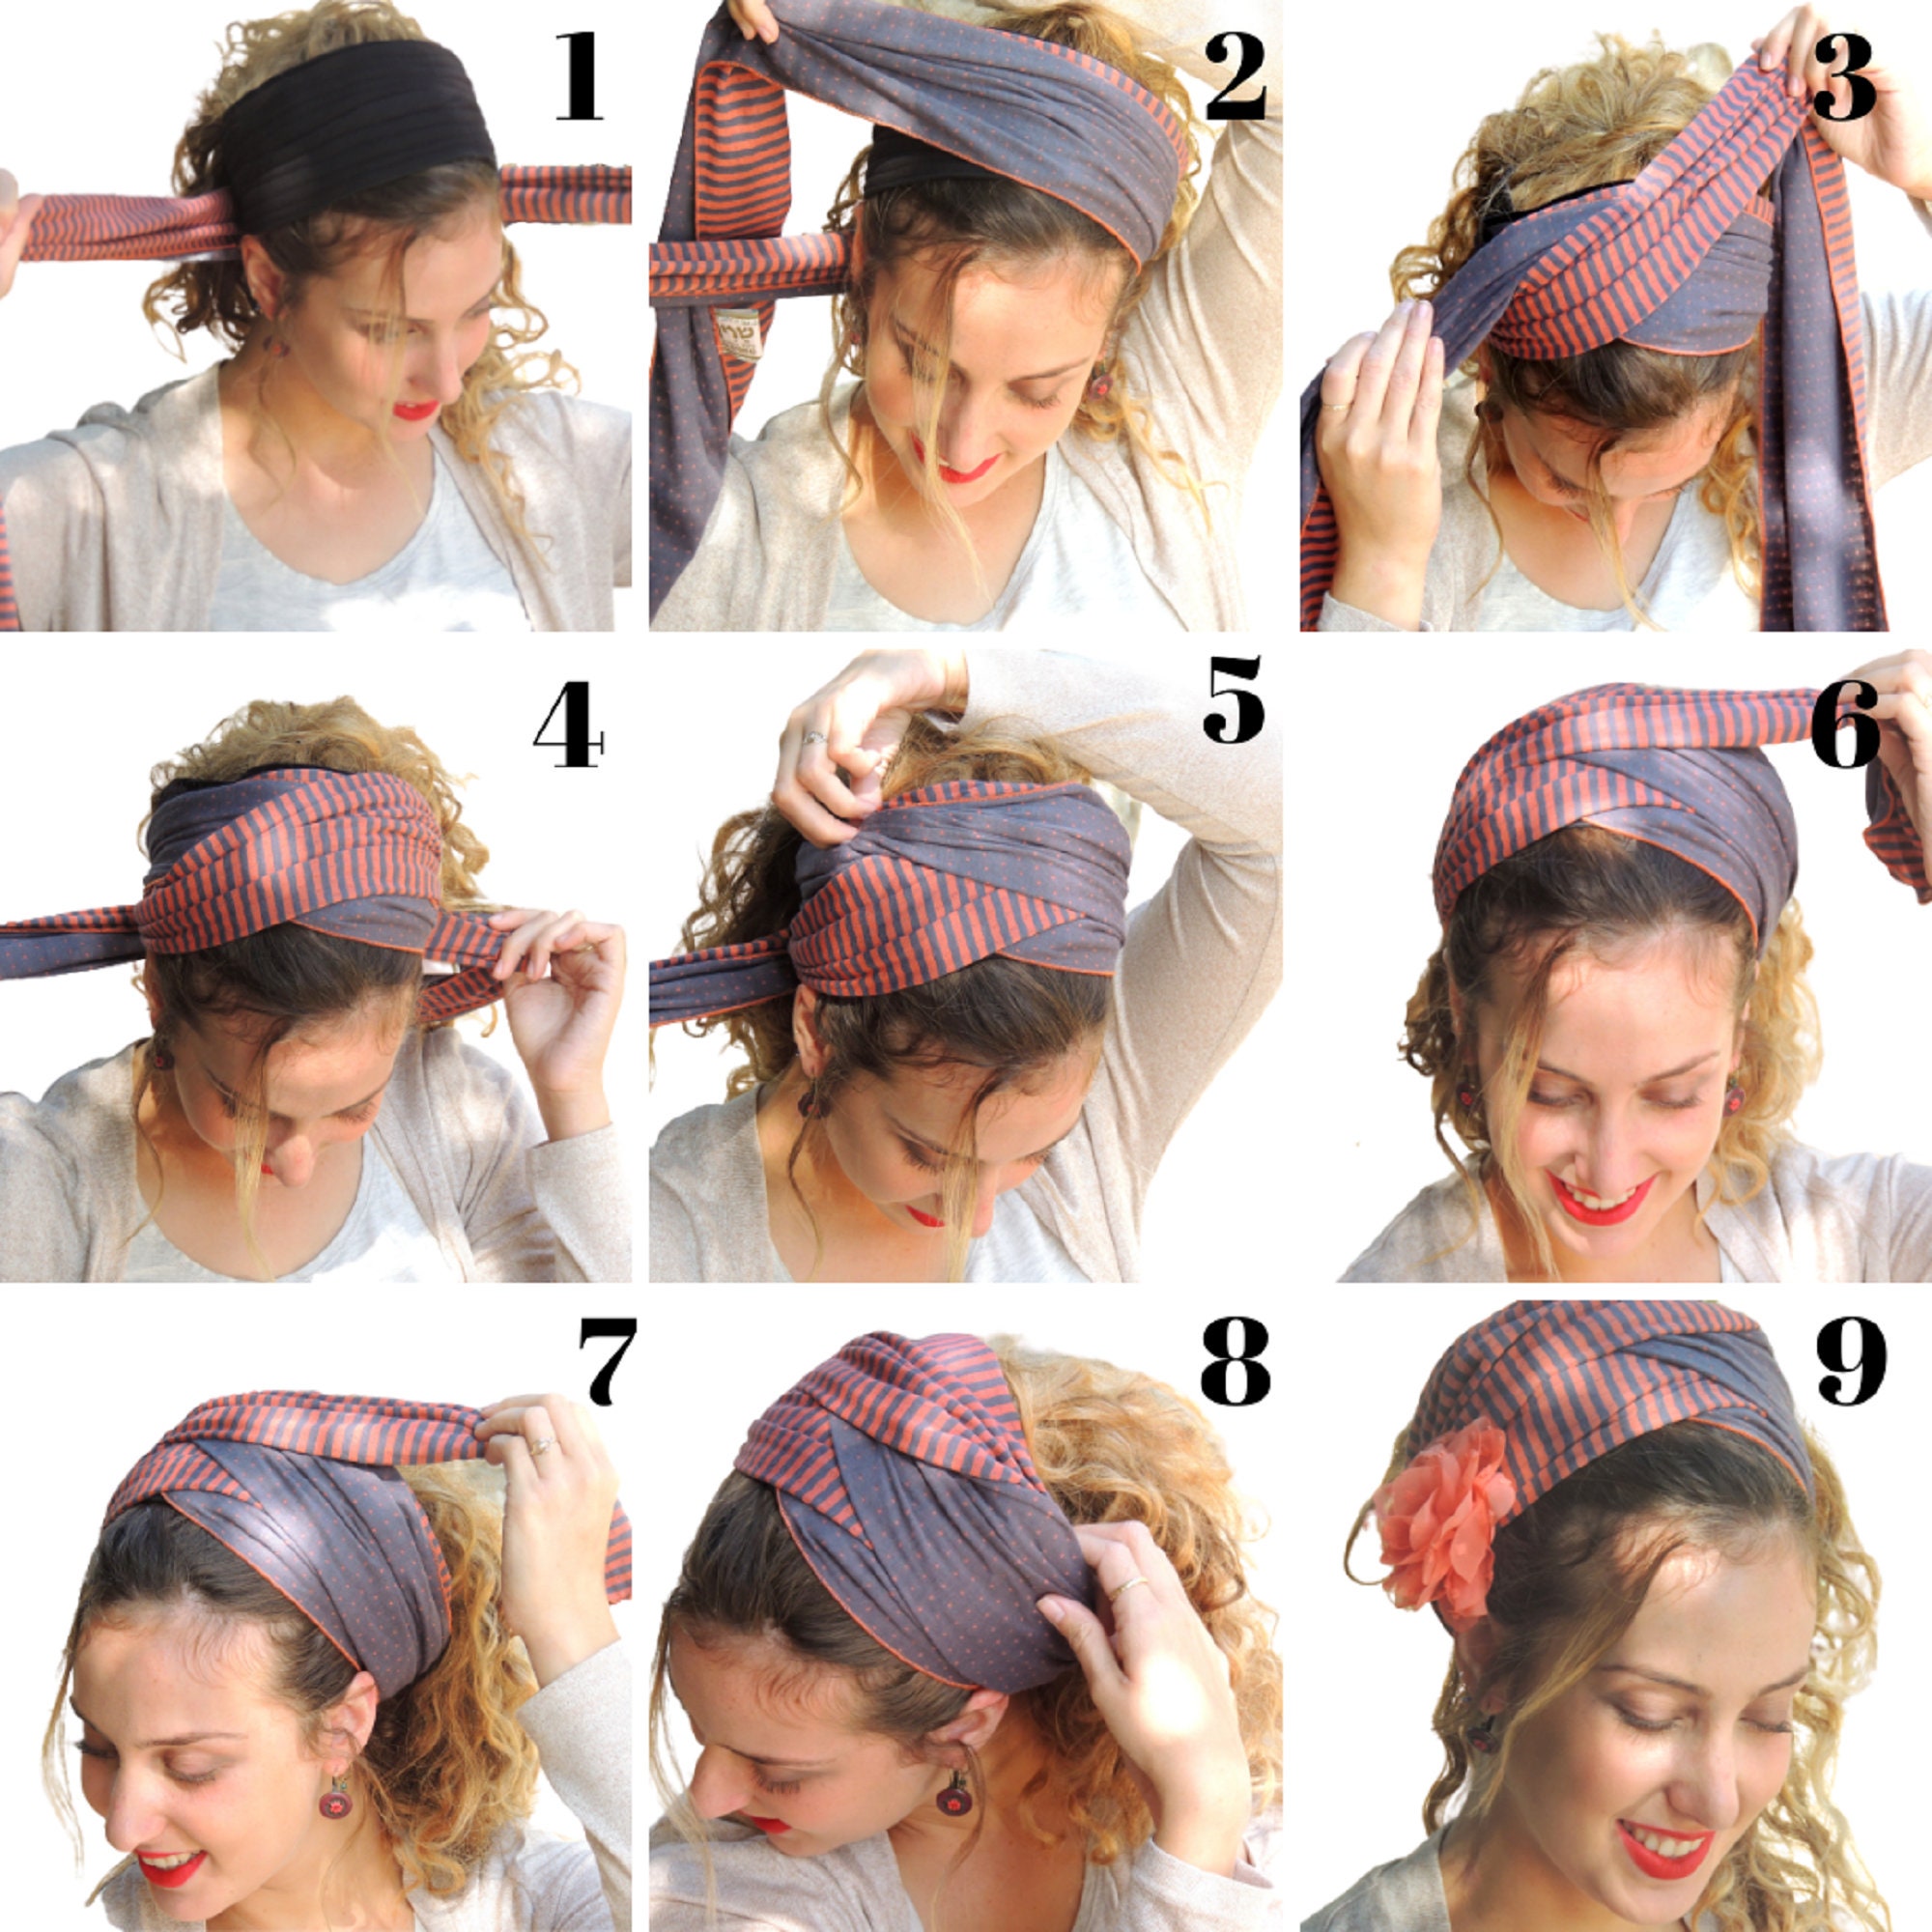 How to tie a head scarf 3 different ways with video tutorial